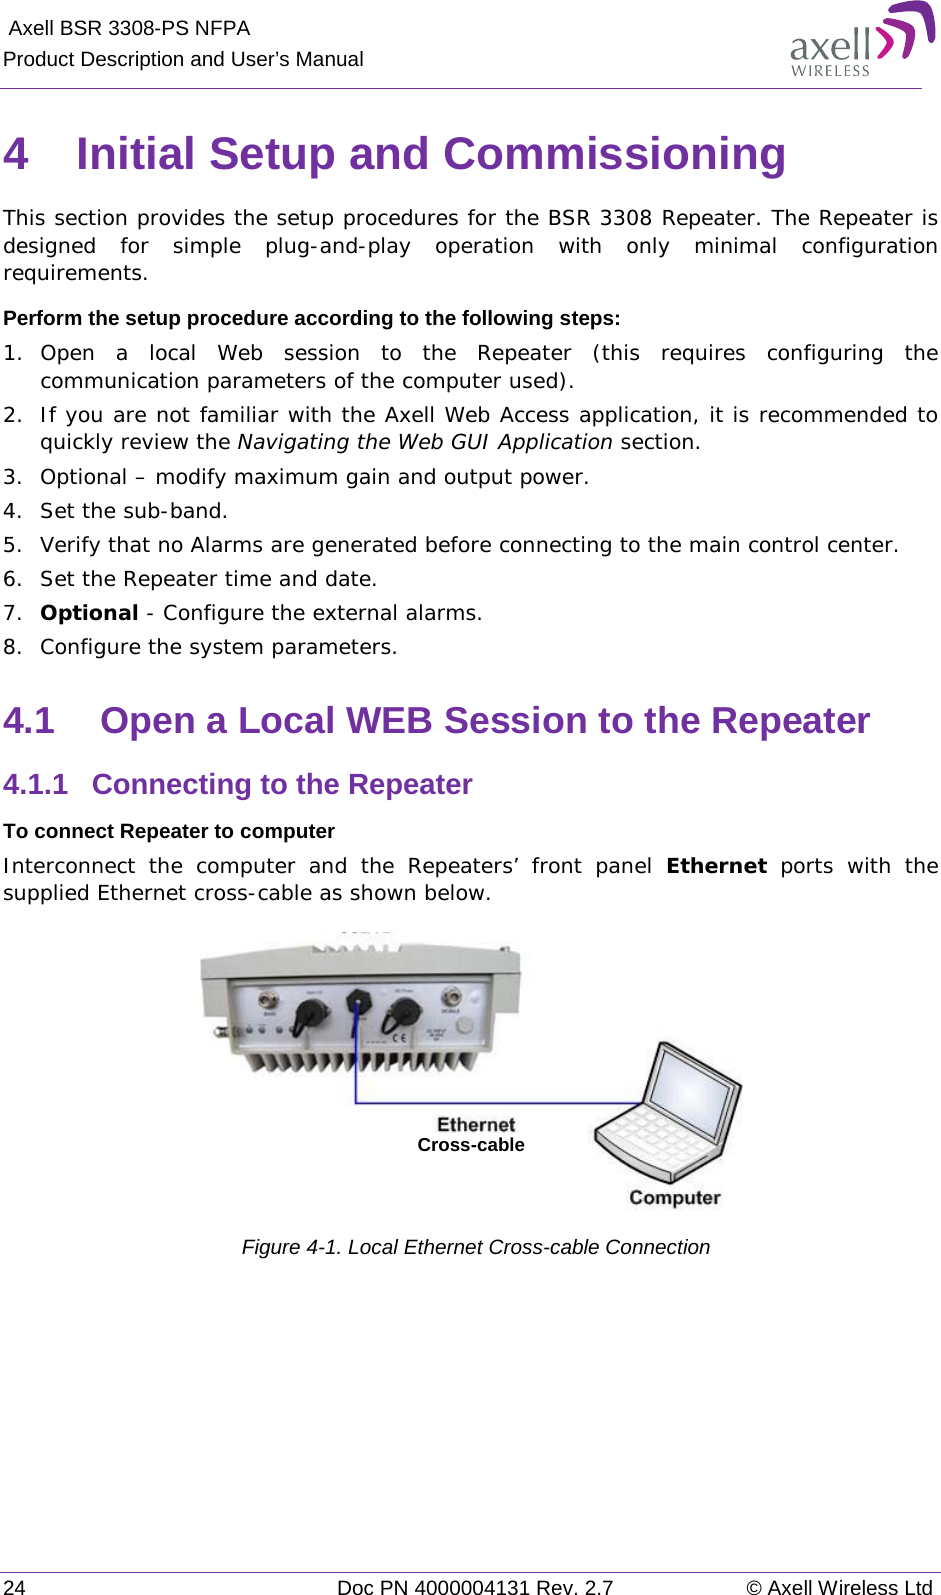  Axell BSR 3308-PS NFPA Product Description and User’s Manual 24 Doc PN 4000004131 Rev. 2.7 © Axell Wireless Ltd  4  Initial Setup and Commissioning This section provides the setup procedures for the BSR 3308 Repeater. The Repeater is designed for simple plug-and-play operation with only minimal configuration requirements.  Perform the setup procedure according to the following steps: 1.  Open a local Web session to the Repeater (this requires configuring the communication parameters of the computer used).  2.  If you are not familiar with the Axell Web Access application, it is recommended to quickly review the Navigating the Web GUI Application section. 3.  Optional – modify maximum gain and output power. 4.  Set the sub-band.  5.  Verify that no Alarms are generated before connecting to the main control center. 6.  Set the Repeater time and date.  7.  Optional - Configure the external alarms. 8.  Configure the system parameters.  4.1  Open a Local WEB Session to the Repeater 4.1.1  Connecting to the Repeater To connect Repeater to computer Interconnect the computer and the Repeaters’ front panel Ethernet ports with the supplied Ethernet cross-cable as shown below.  Figure  4-1. Local Ethernet Cross-cable Connection Cross-cable 